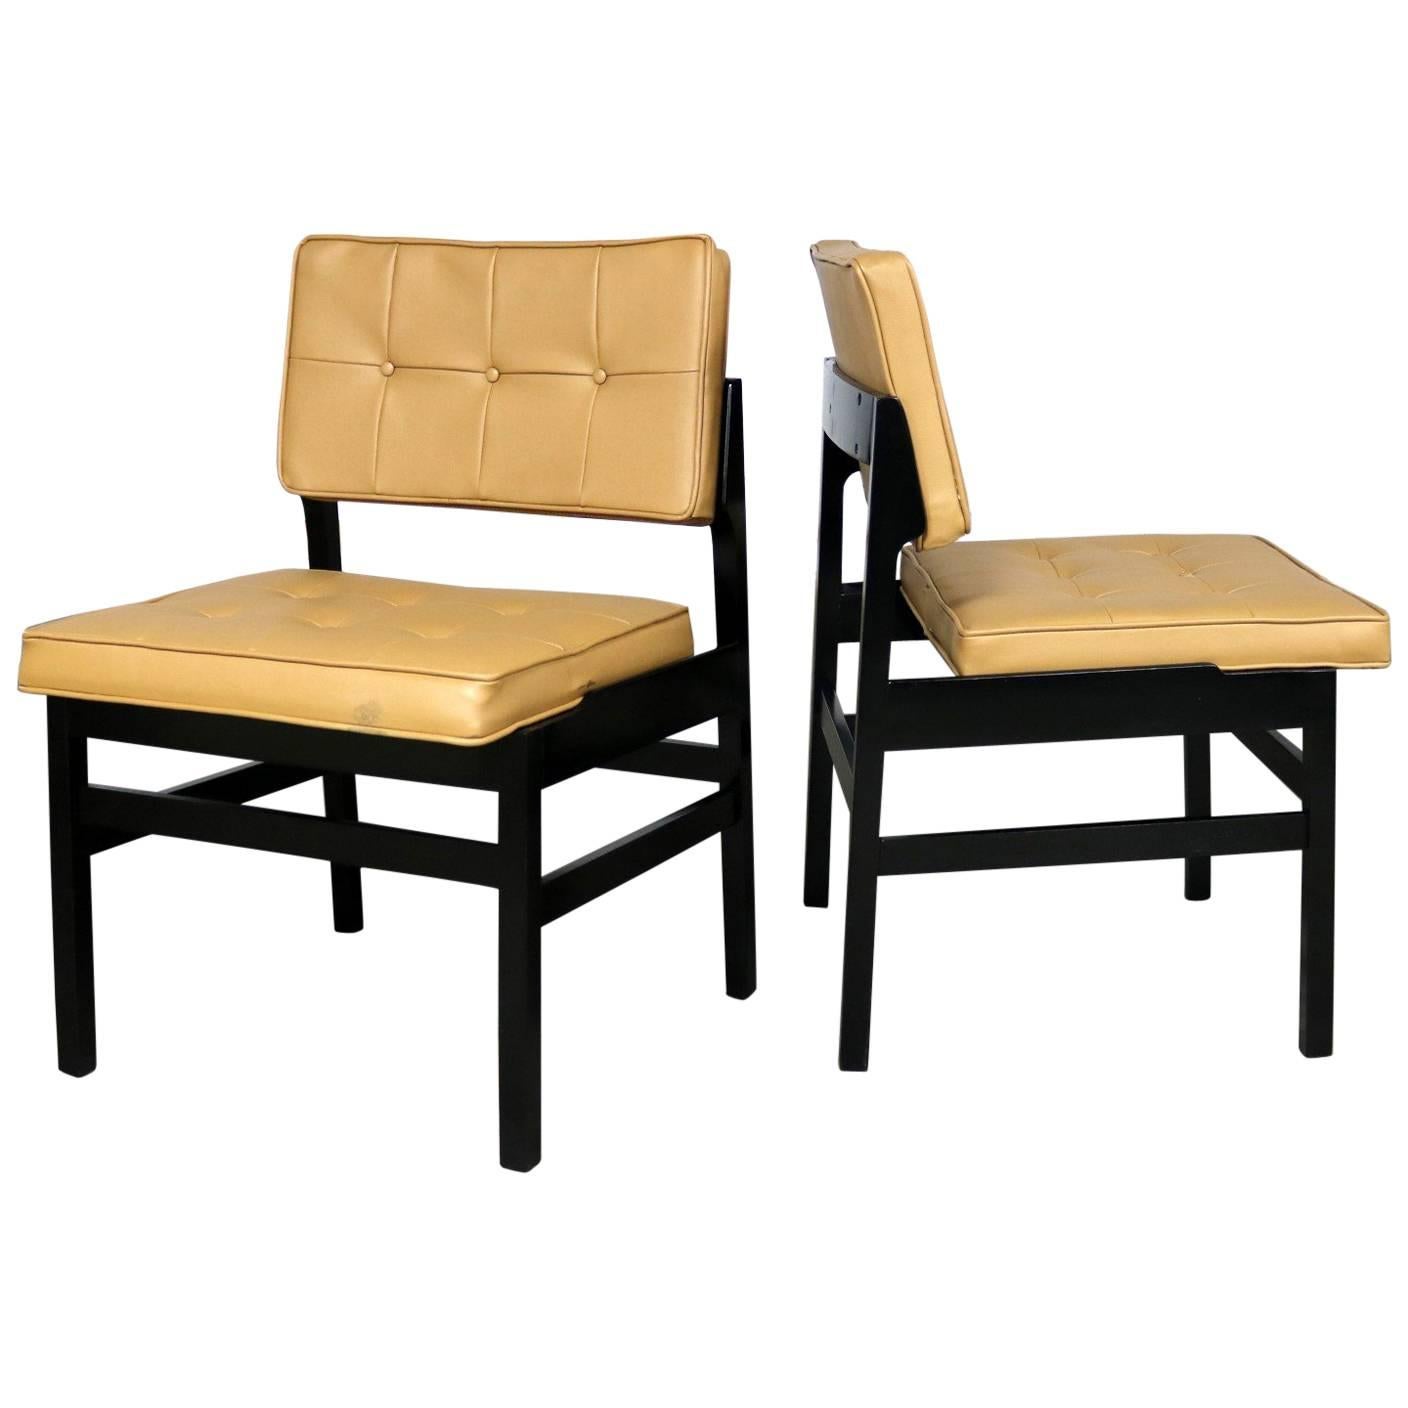 Pair of Hibriten Blackened Wood and Faux Leather Mid-Century Modern Chairs